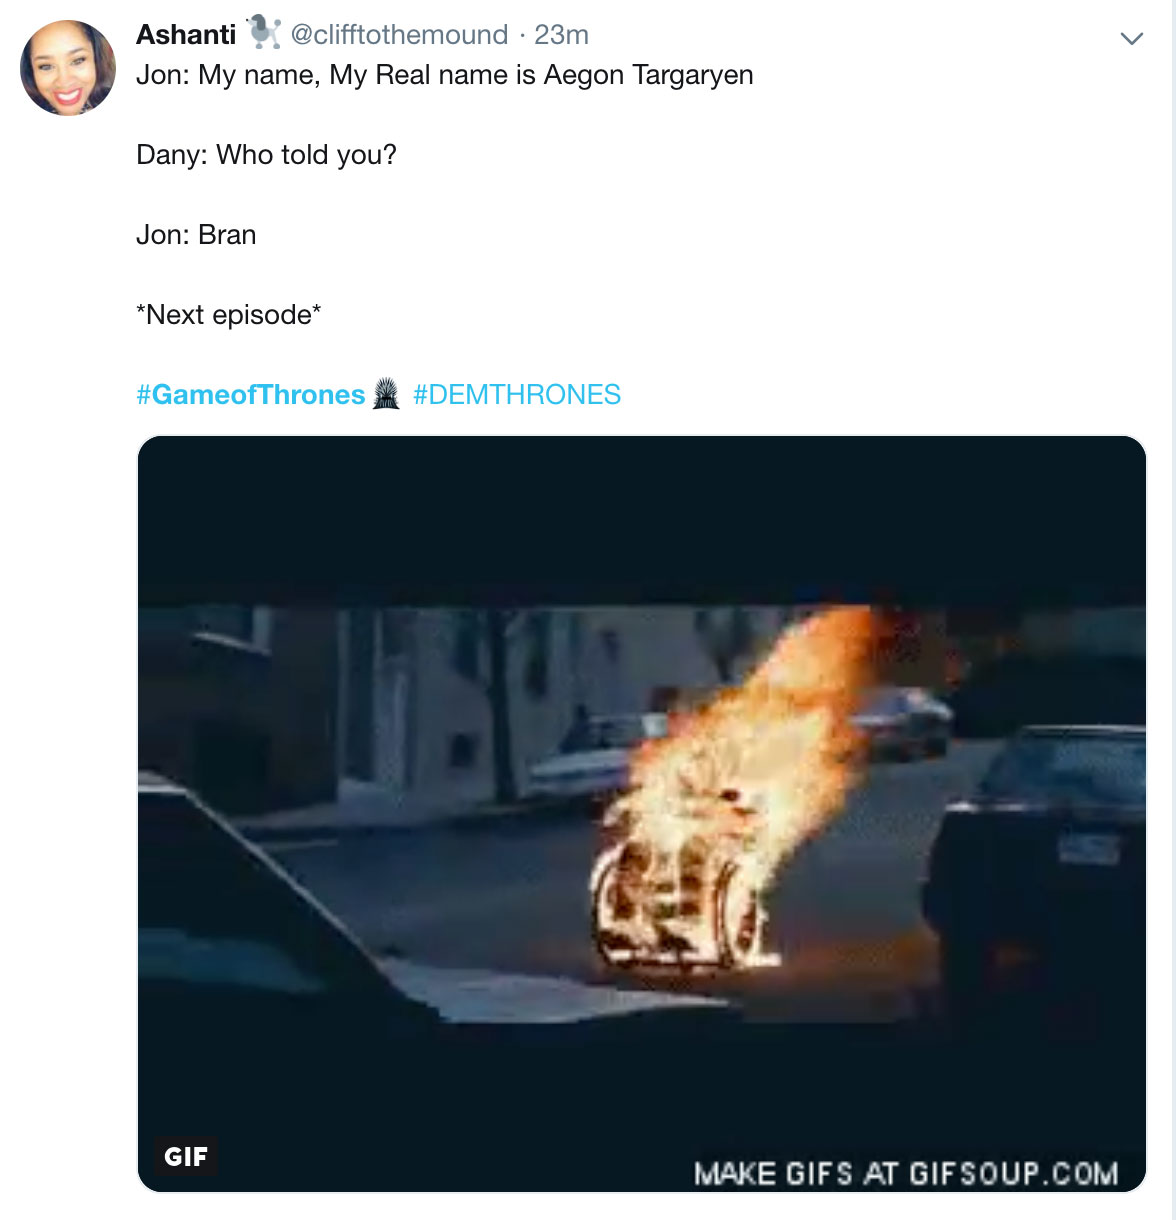 Game of Thrones Season 8 Episode 2 Meme - Still from a gif of a guy in a wheelchair on fire with the text 'jon, my name my real name is aegon targaryen, dany, who told you, bran, next episode'